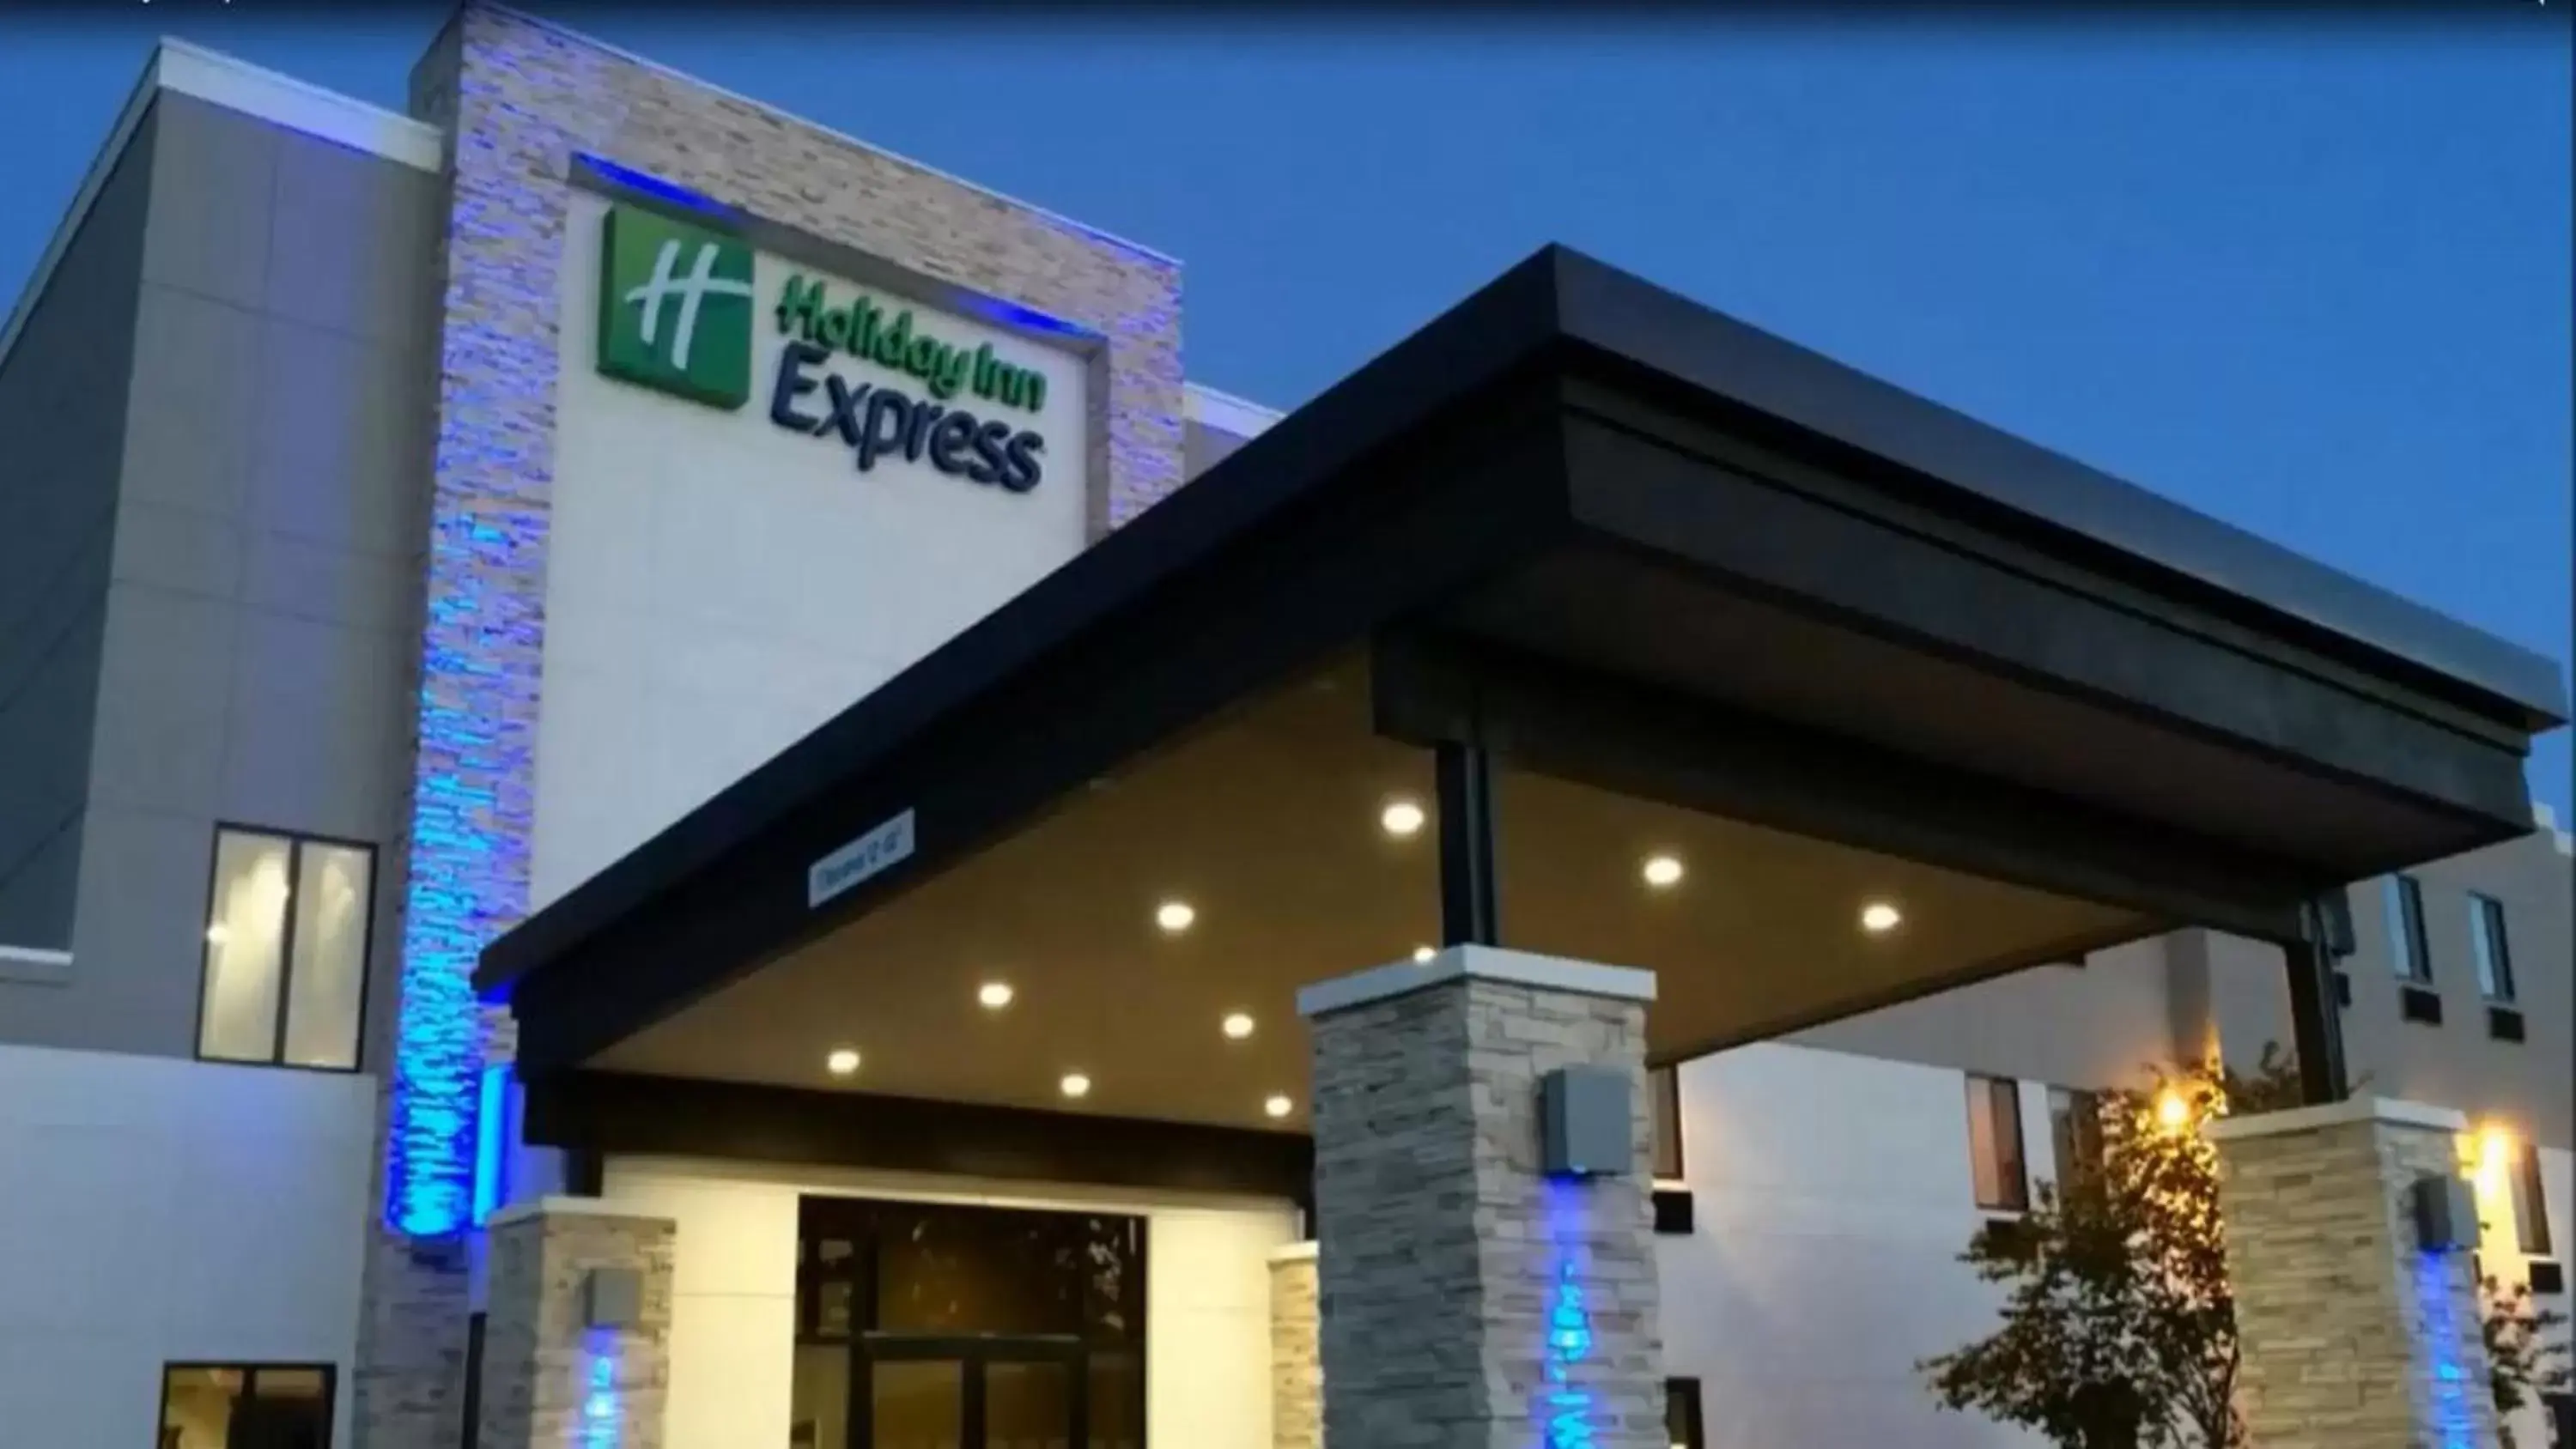 Property Building in Holiday Inn Express & Suites Blackwell, an IHG Hotel